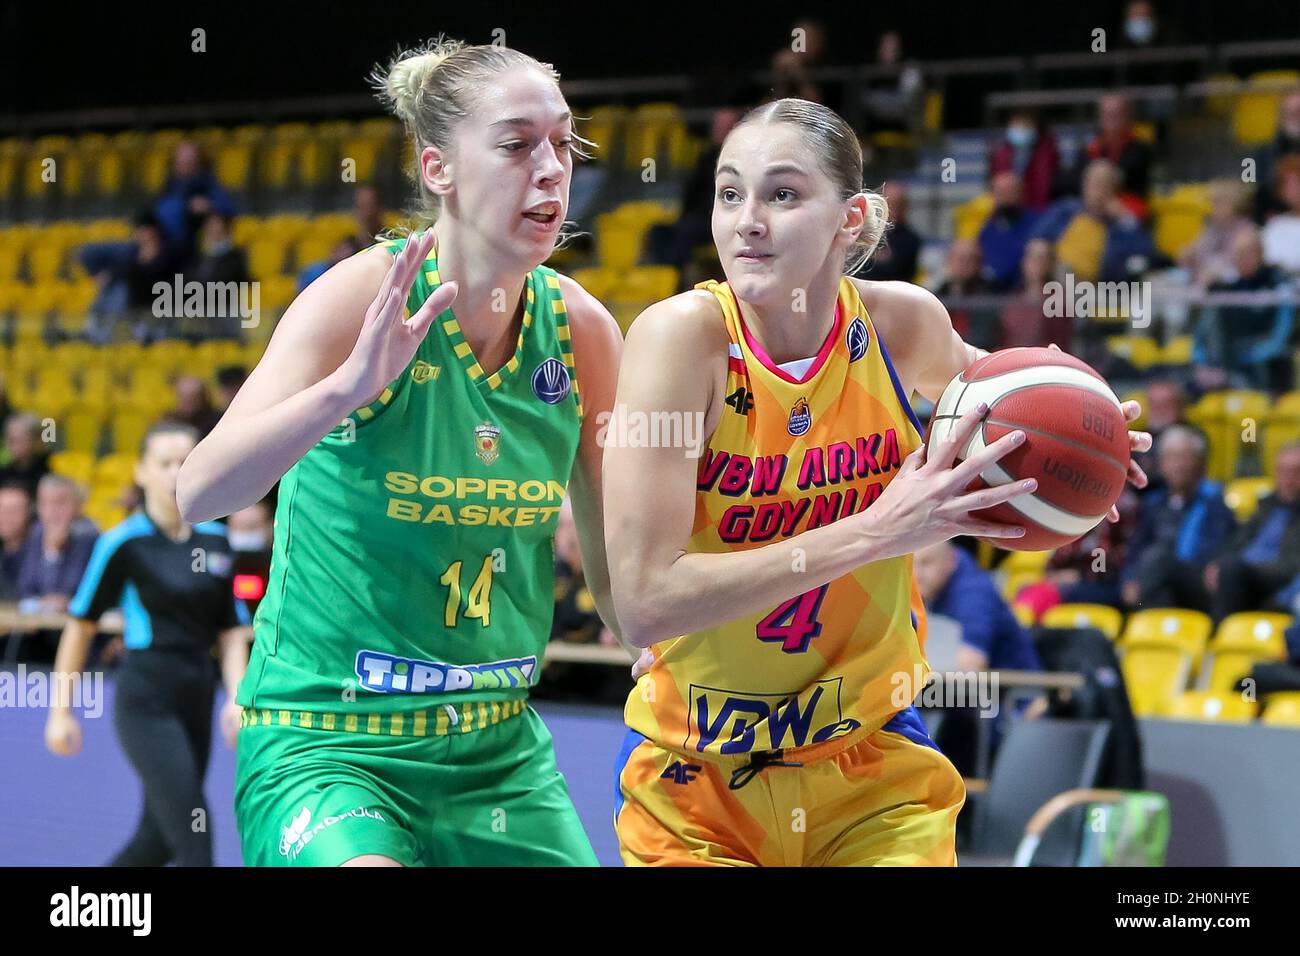 Bernadett Hatar and Ana-Marija Begic are seen in action during the Euro  League Women group B match between VBW Arka Gdynia and Sopron Basket in  Gdynia. (Final score; VBW Arka Gdynia 71:86